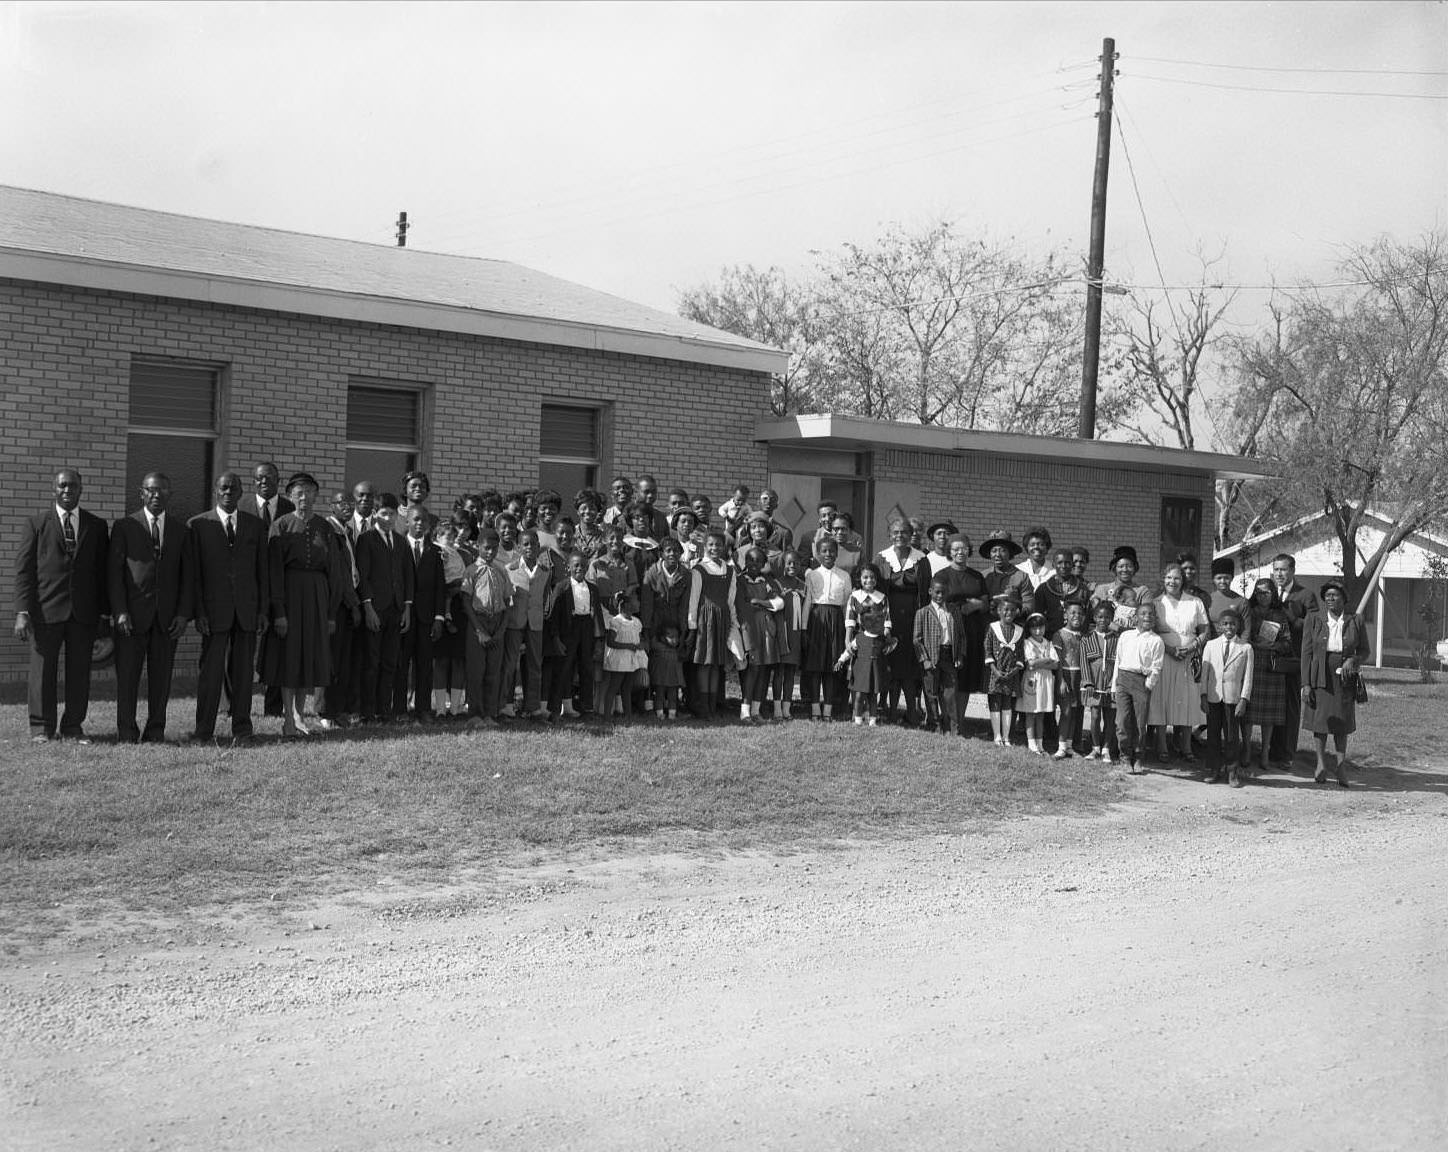 Entire congregation of the Seventh Day Adventists pose together outside church, 1965